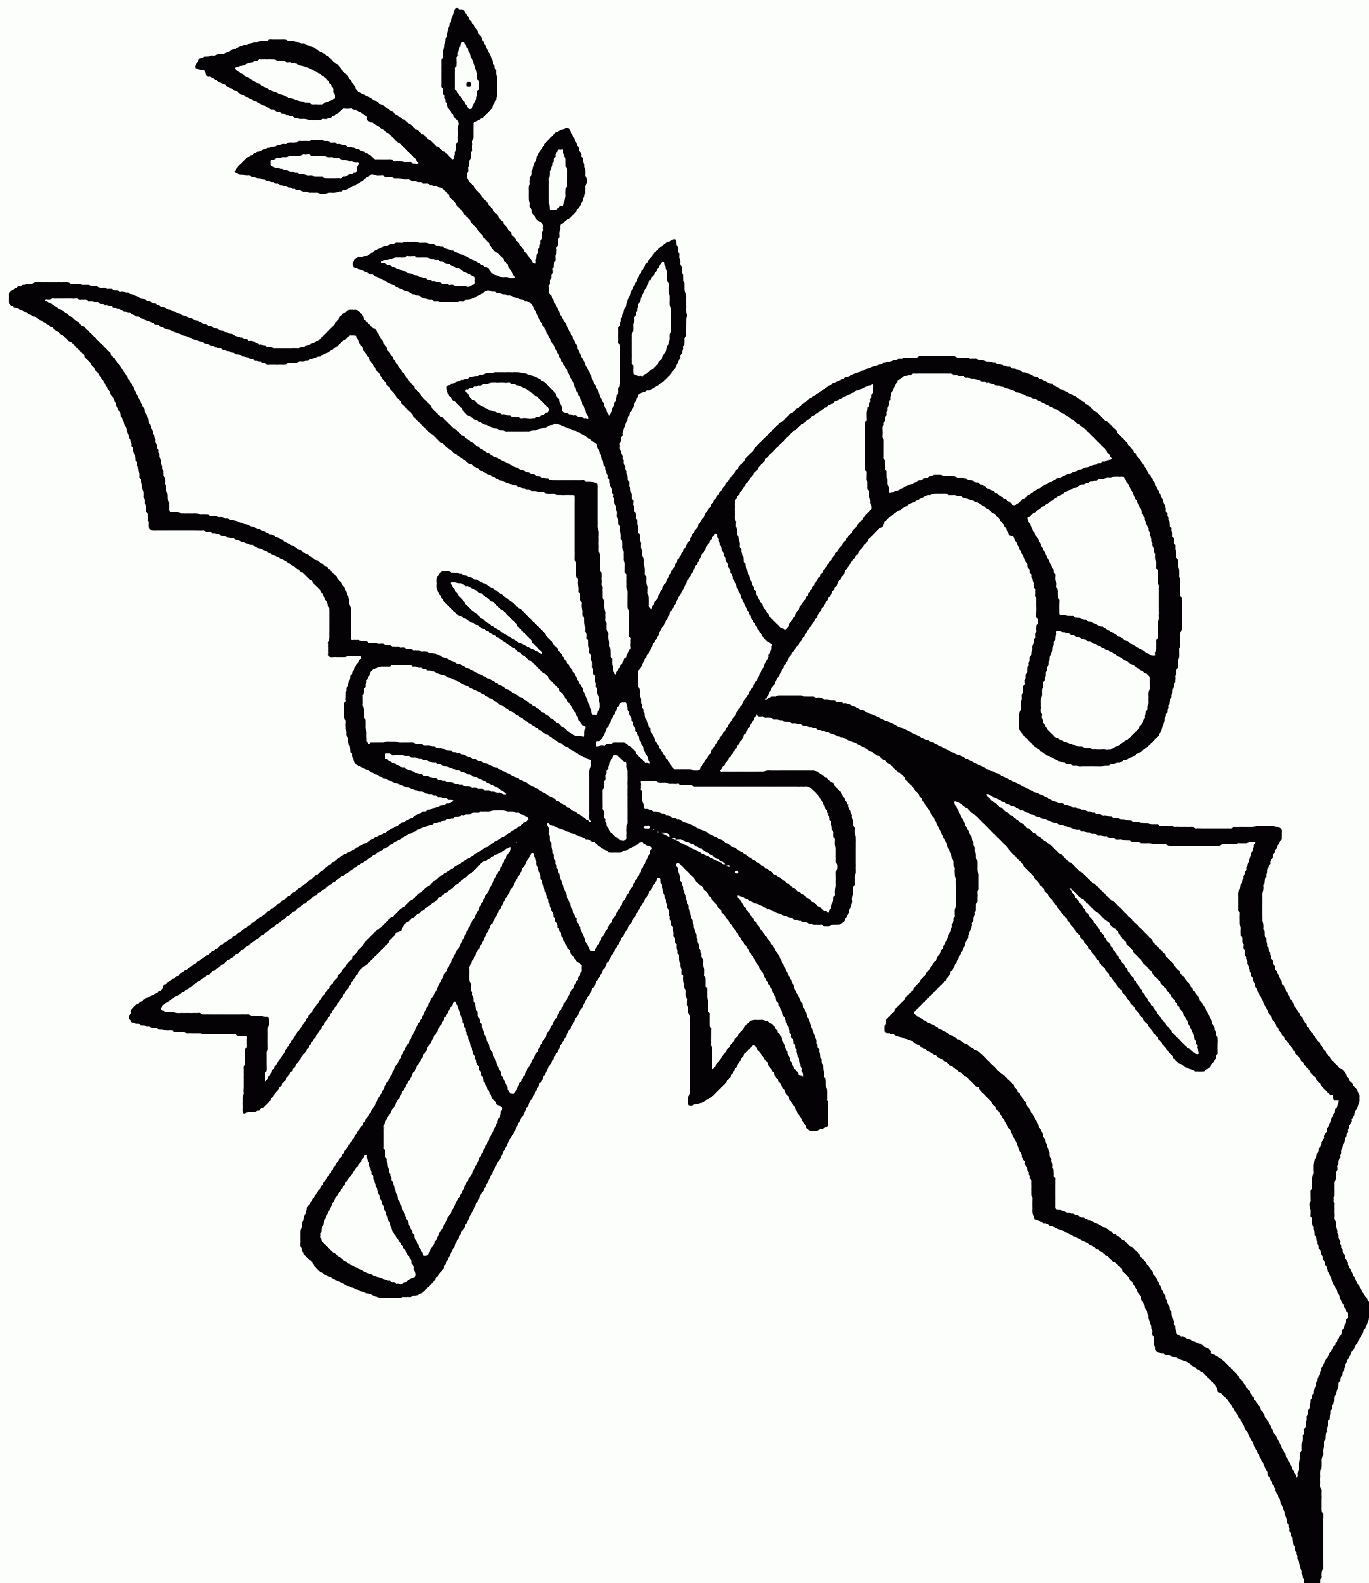 Download Printable Candy Cane Coloring Pages - Coloring Home